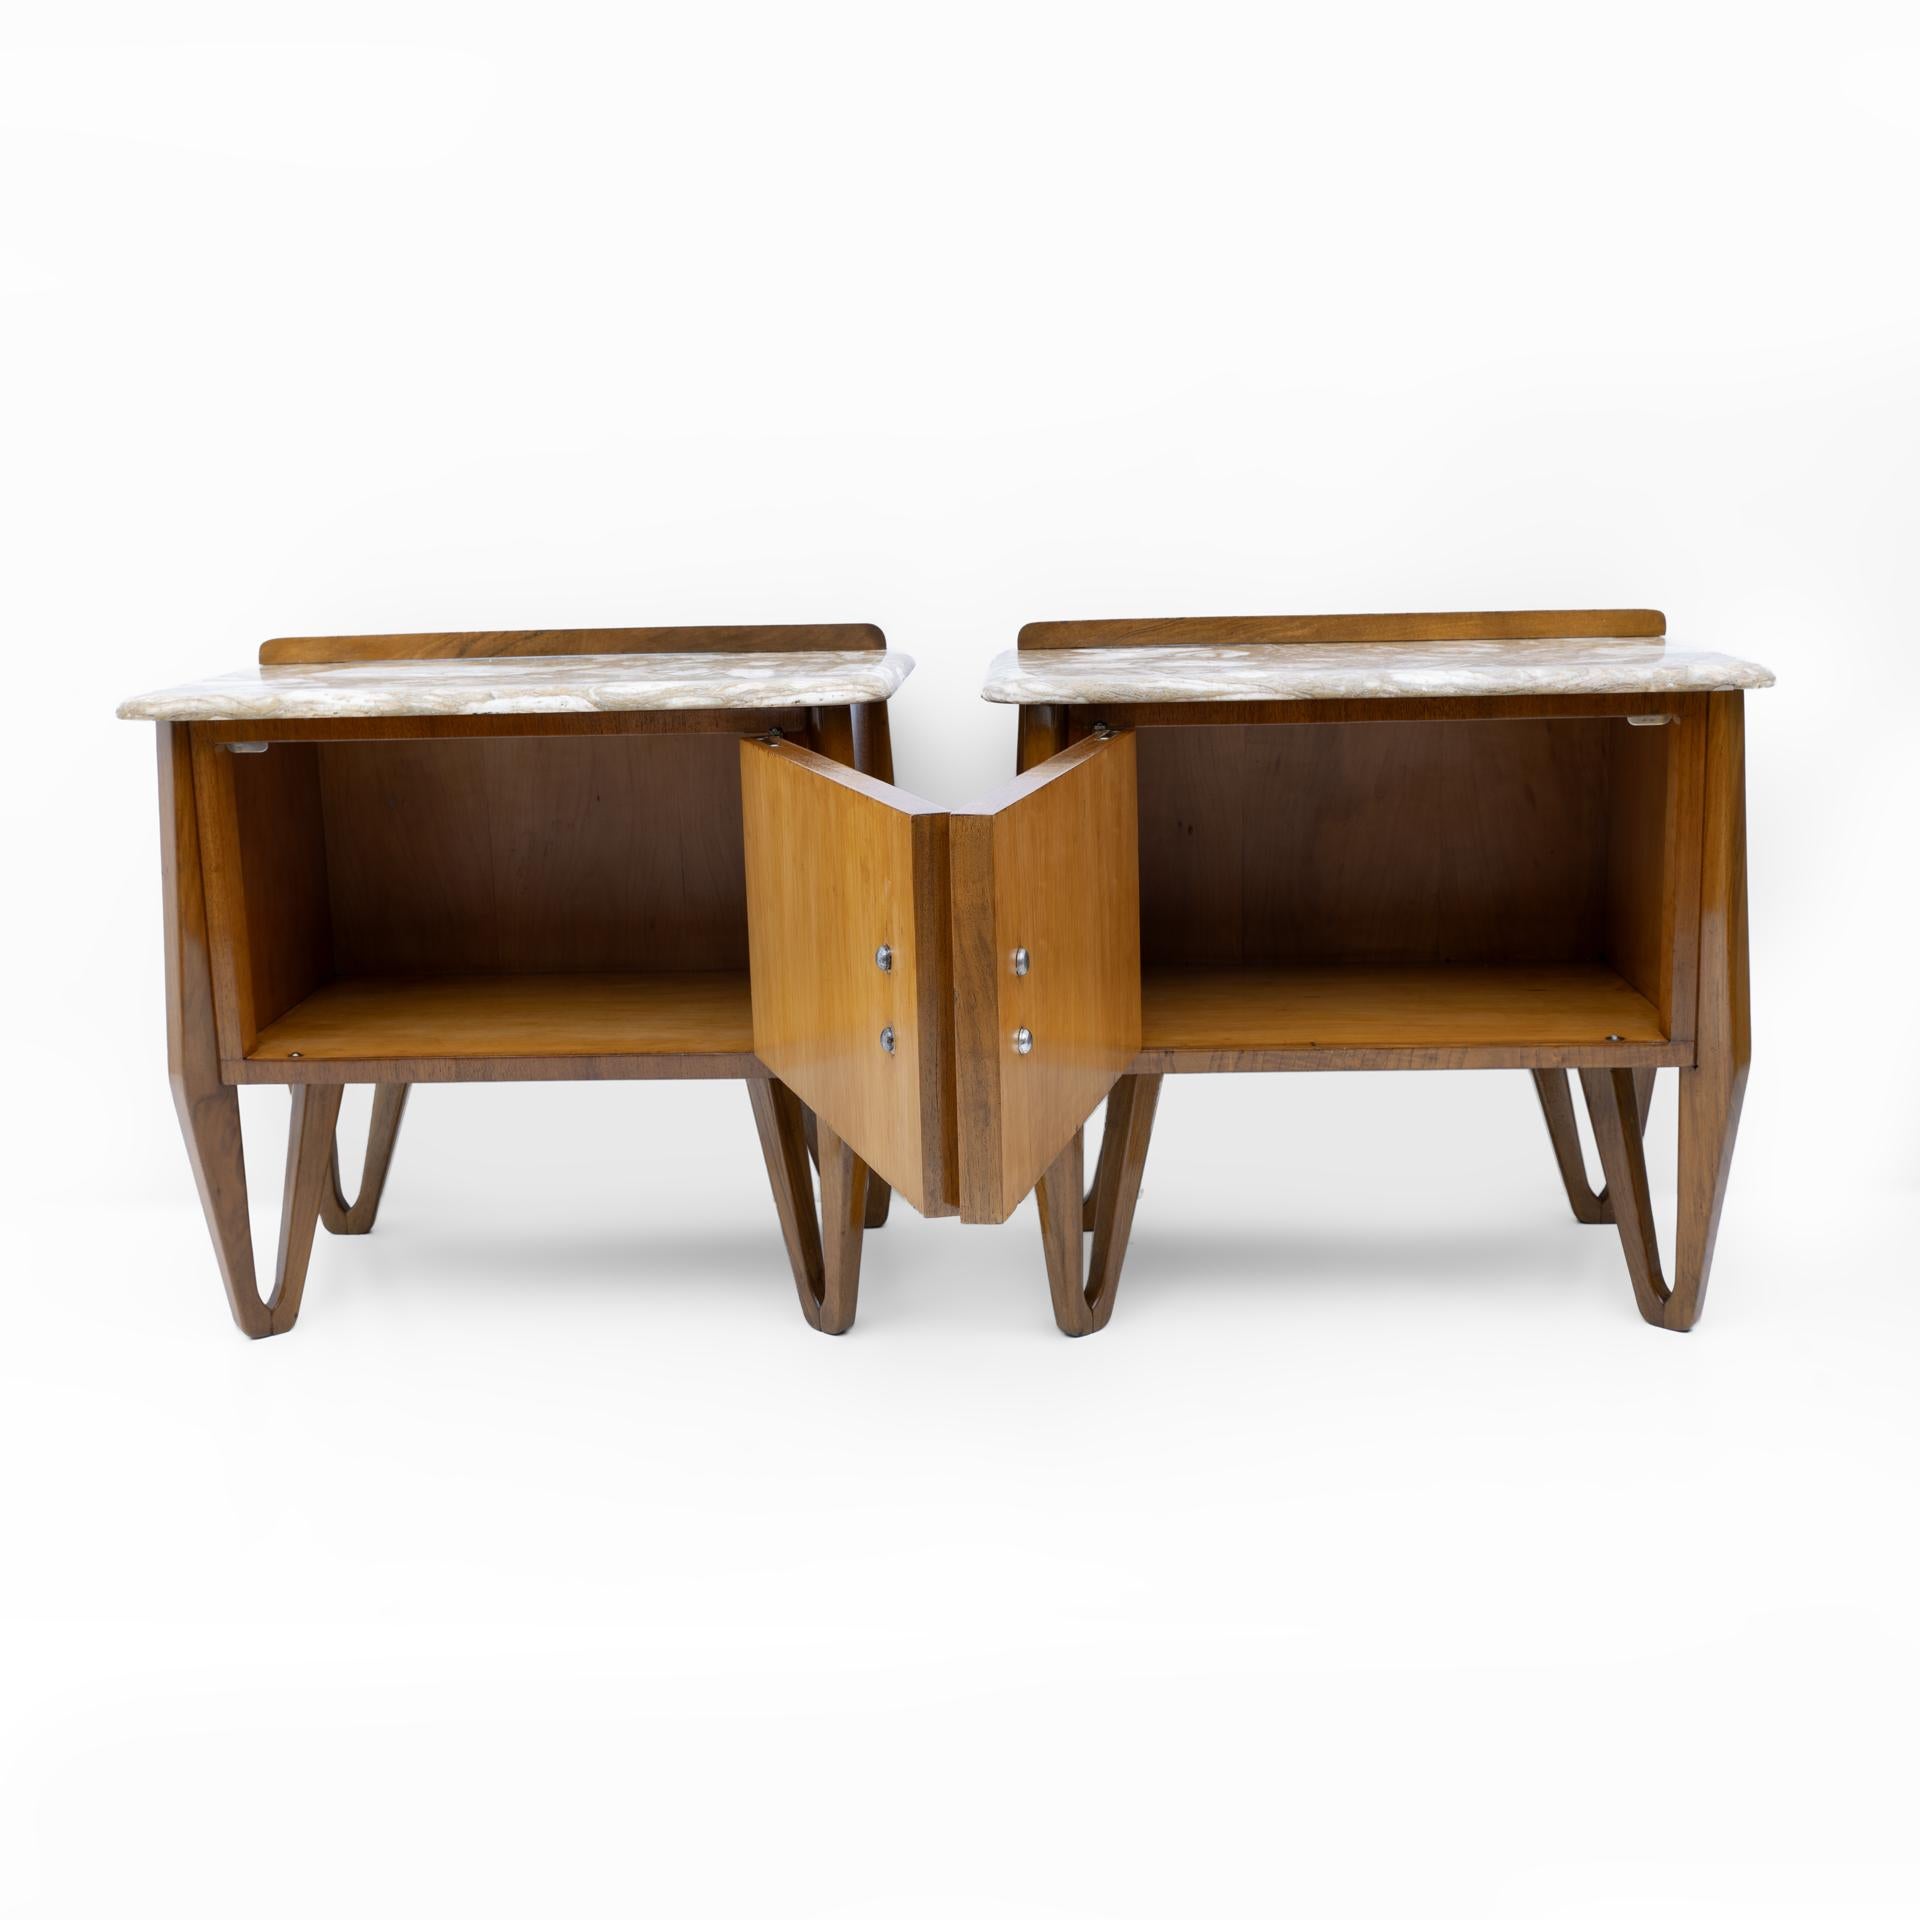 Pair of Mid-Century Modern Italian Walnut and Marble Nightstands, 1950s For Sale 5